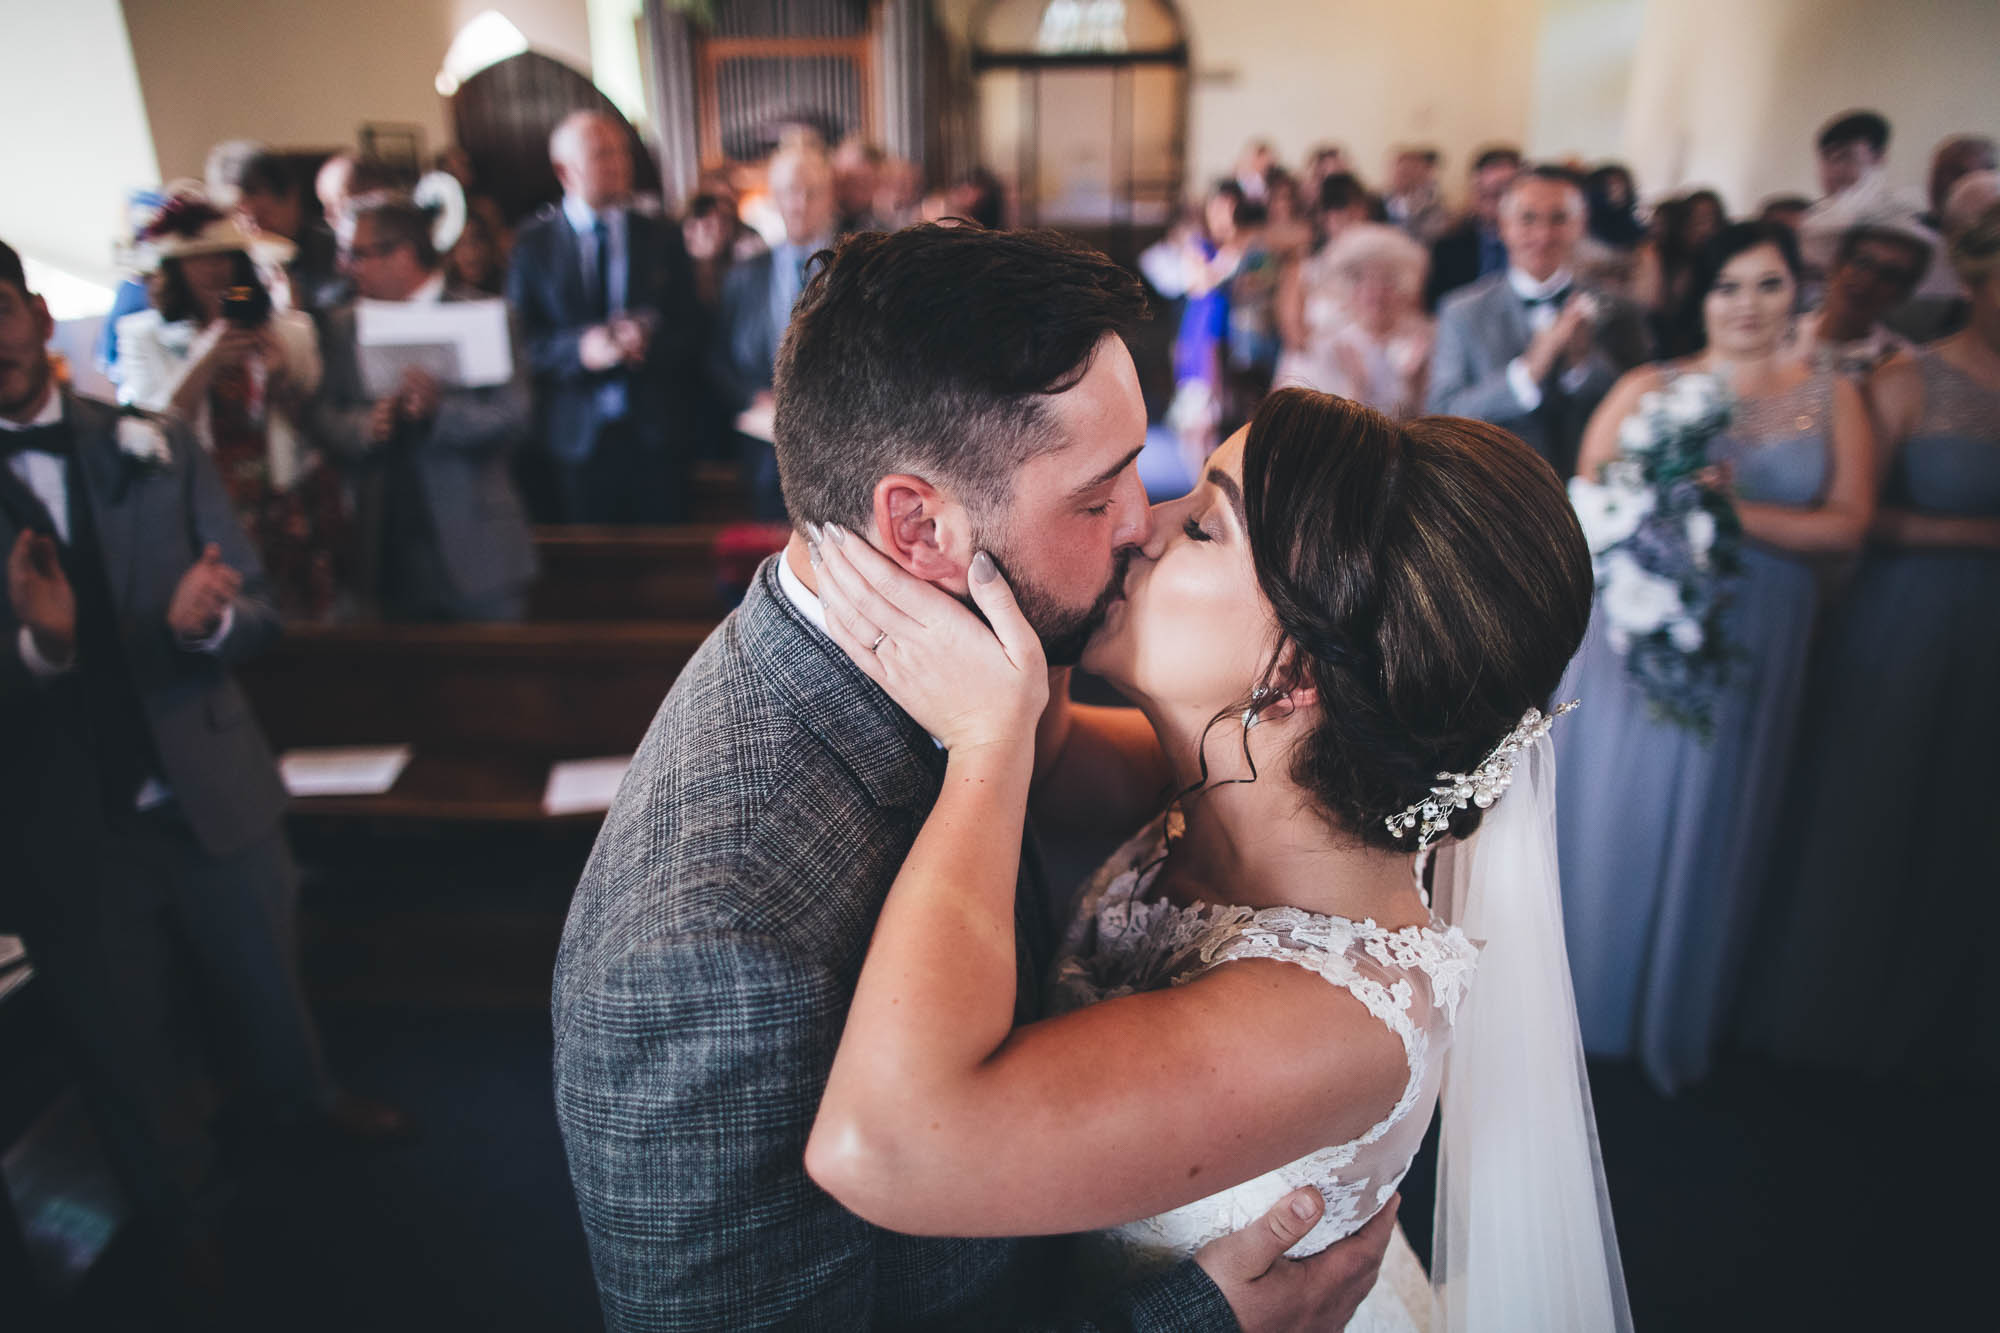 Bride and Groom share their first kiss in front of wedding guests at Wedding Ceremony